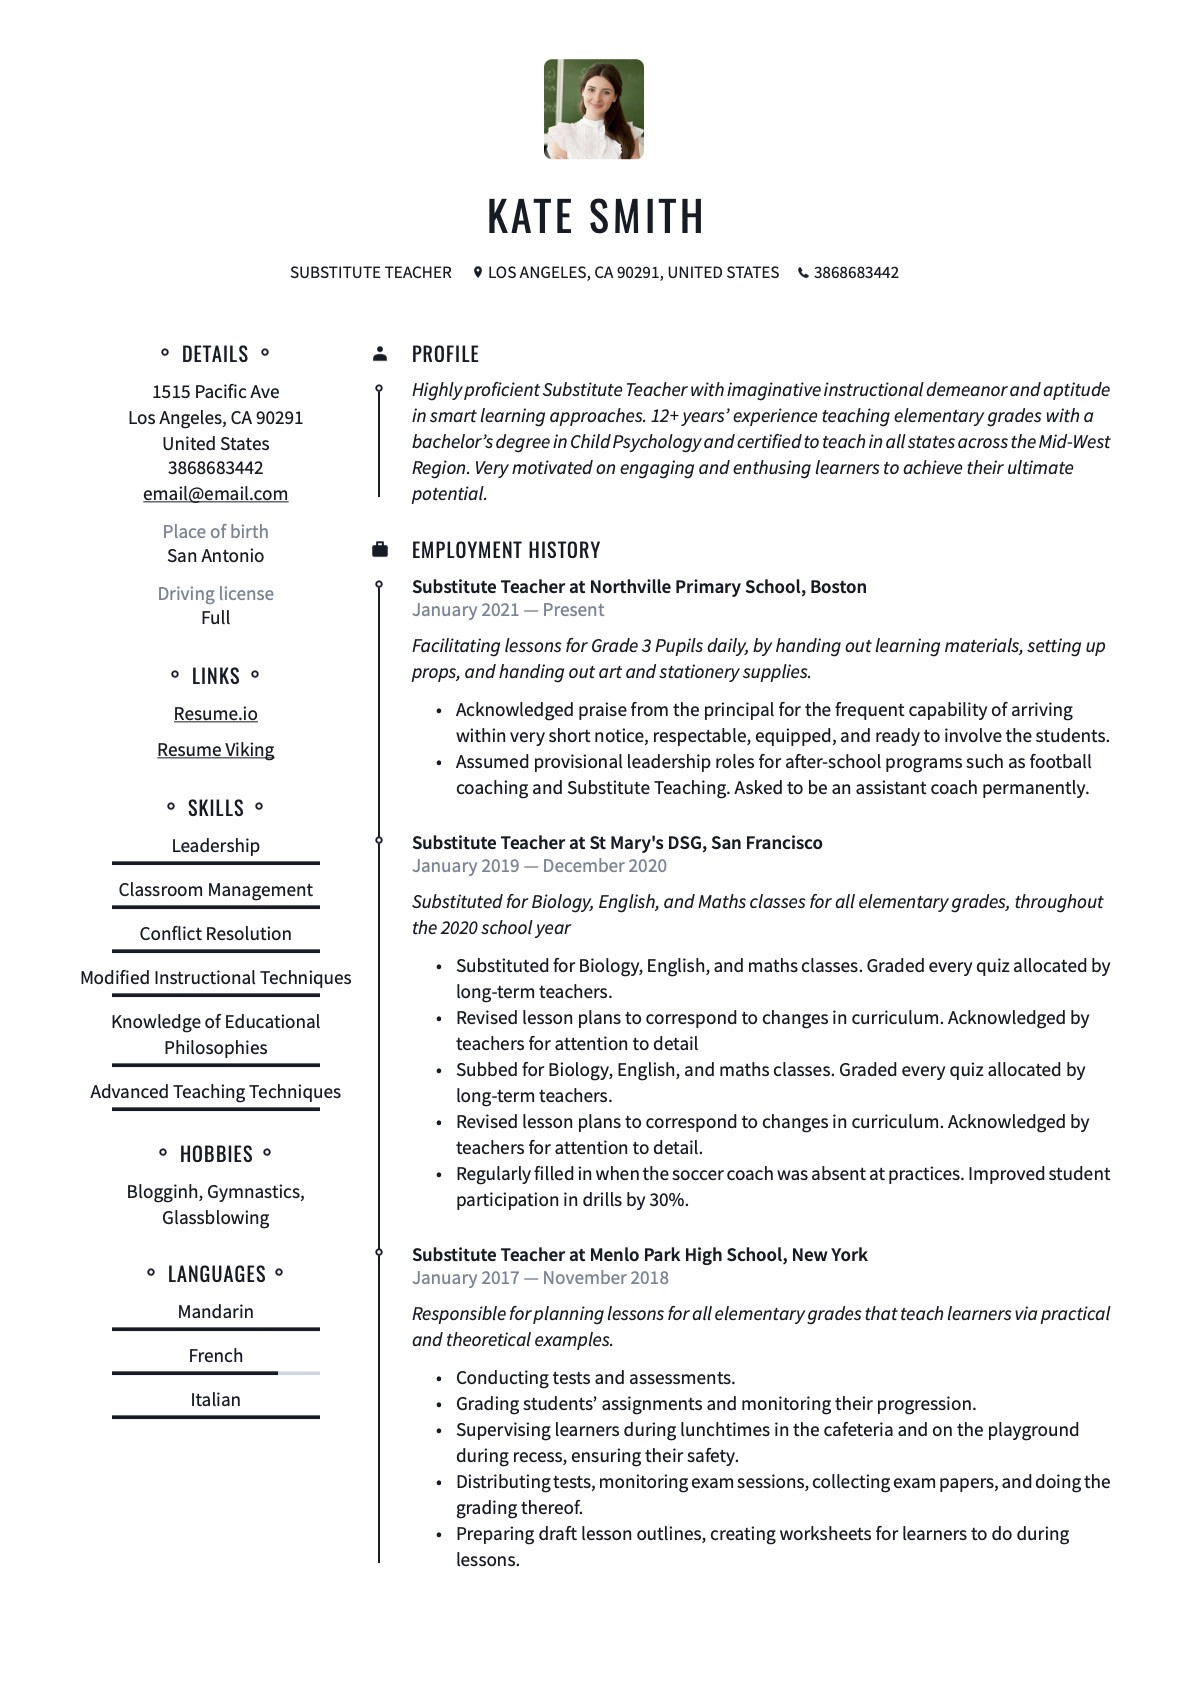 Functional Resume Sample for Substitute Teachers Trying to Become Teachers Substitute Teacher Resume & Writing Guide  20 Templates Pdf